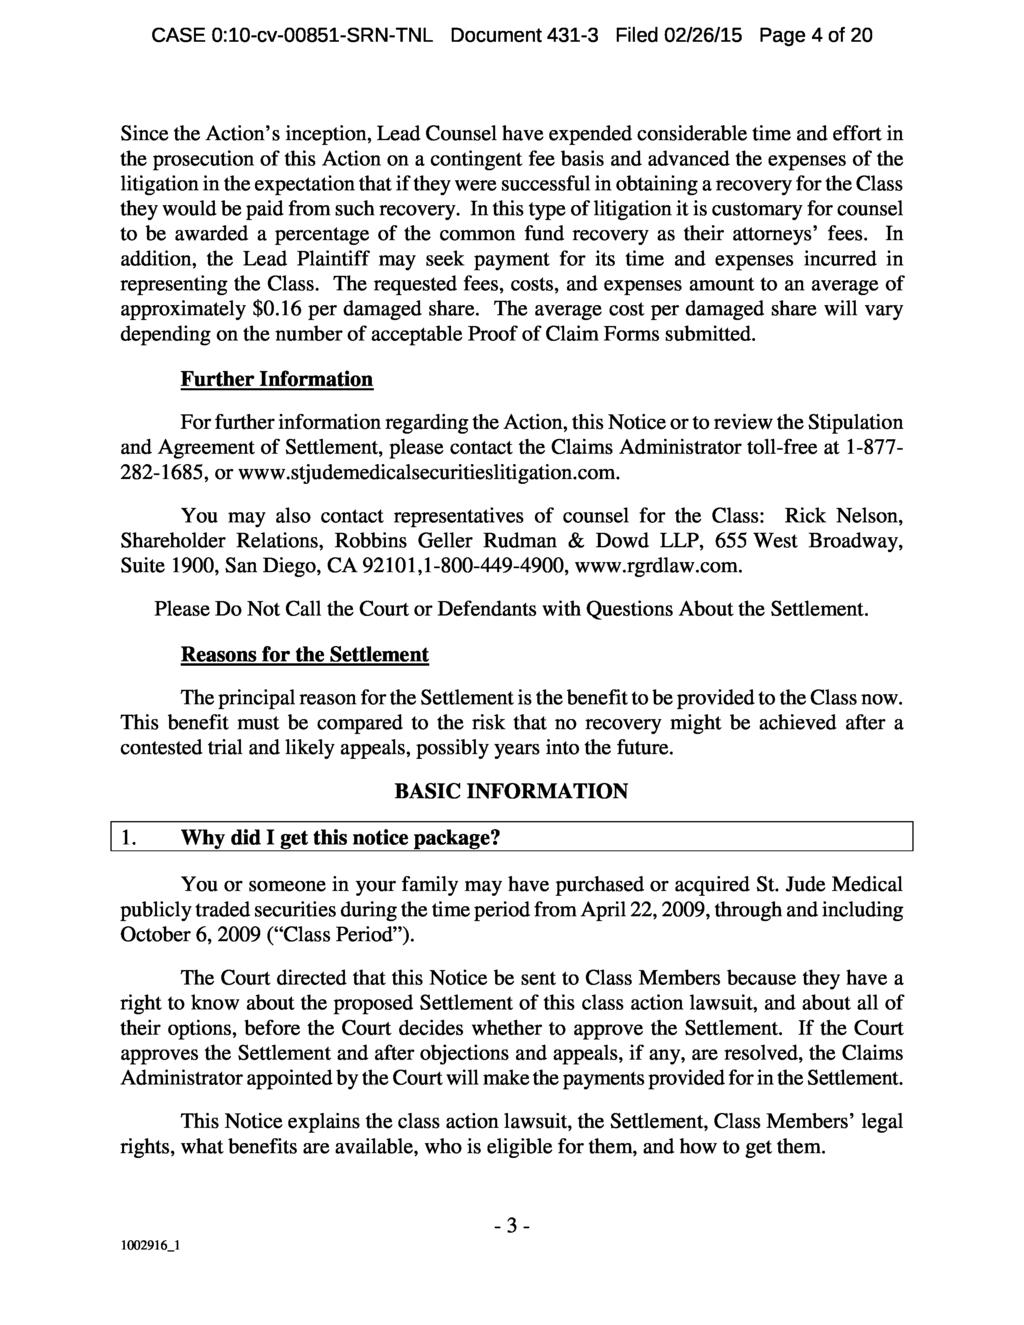 CASE 0:10-cv-00851-SRN-TNL Document 431-3 Filed 02/26/15 Page 4 of 20 Since the Action s inception, Lead Counsel have expended considerable time and effort in the prosecution of this Action on a